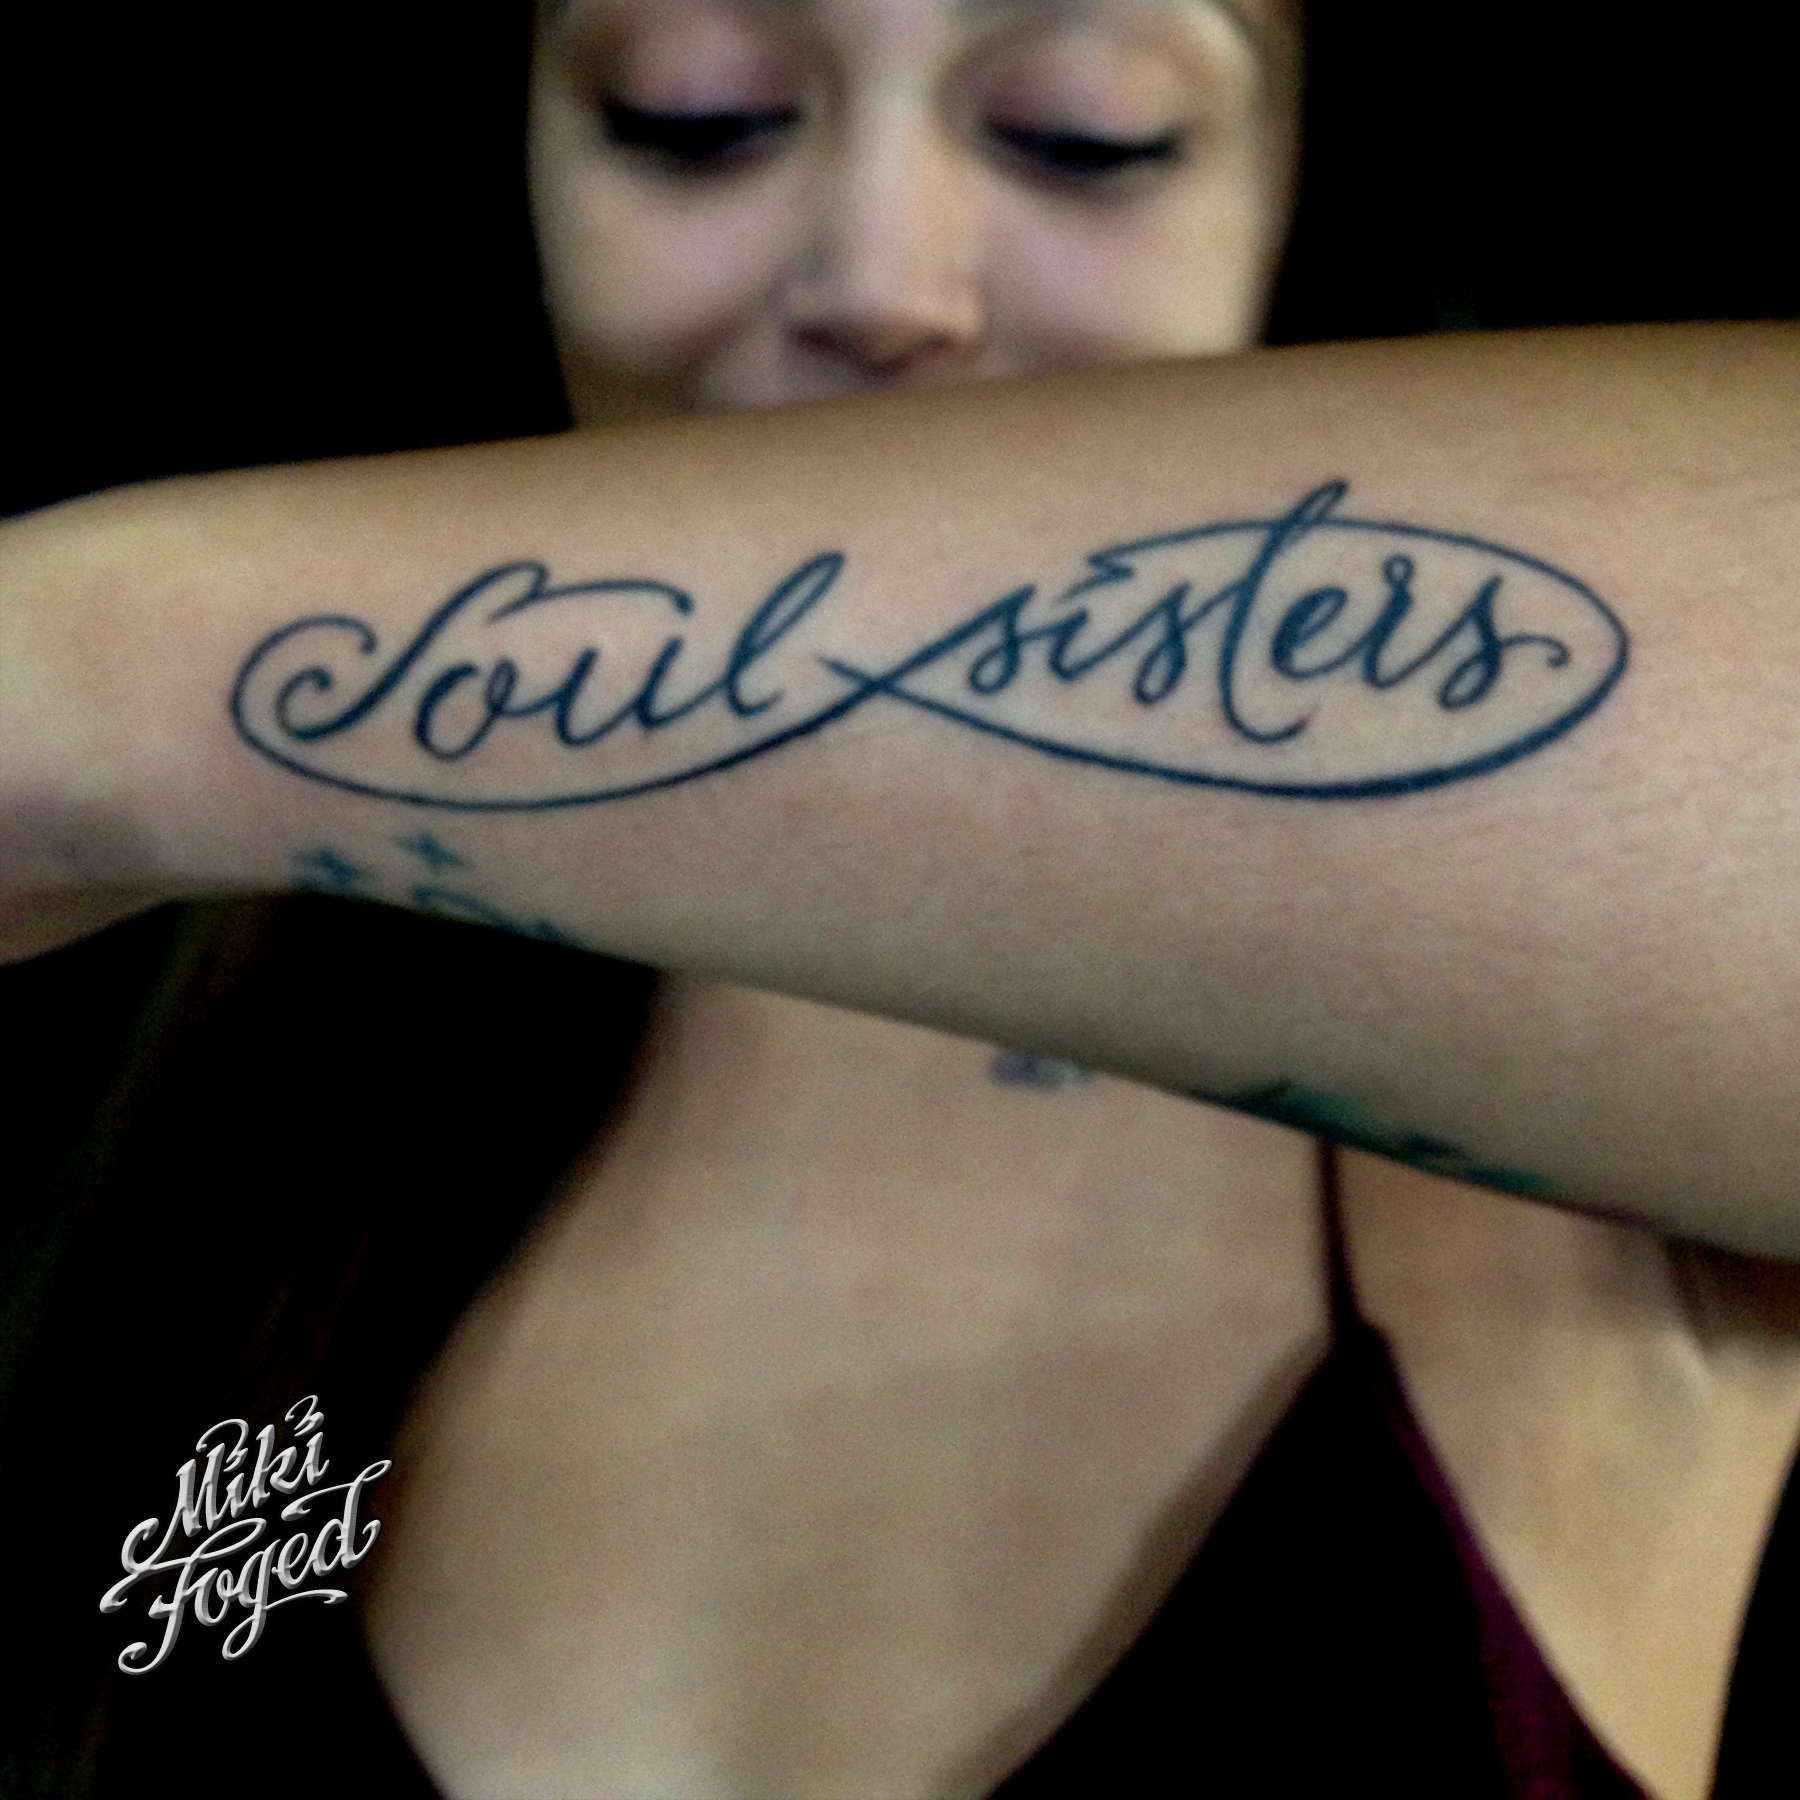 15HRDAZE — Cutie little matching tattoos on some soul sisters...